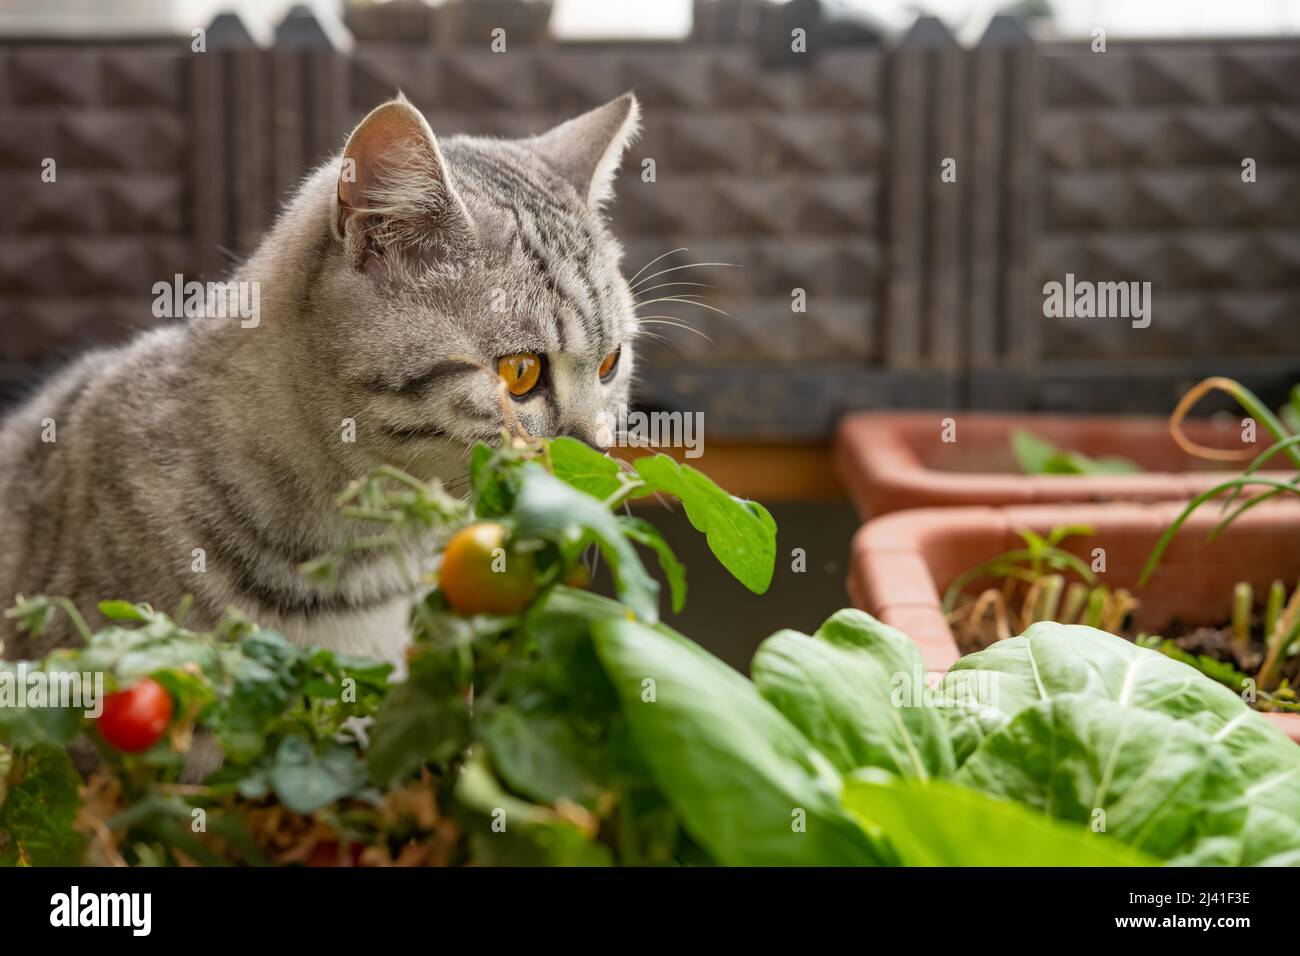 an american cat in front of a planted tomato Stock Photo